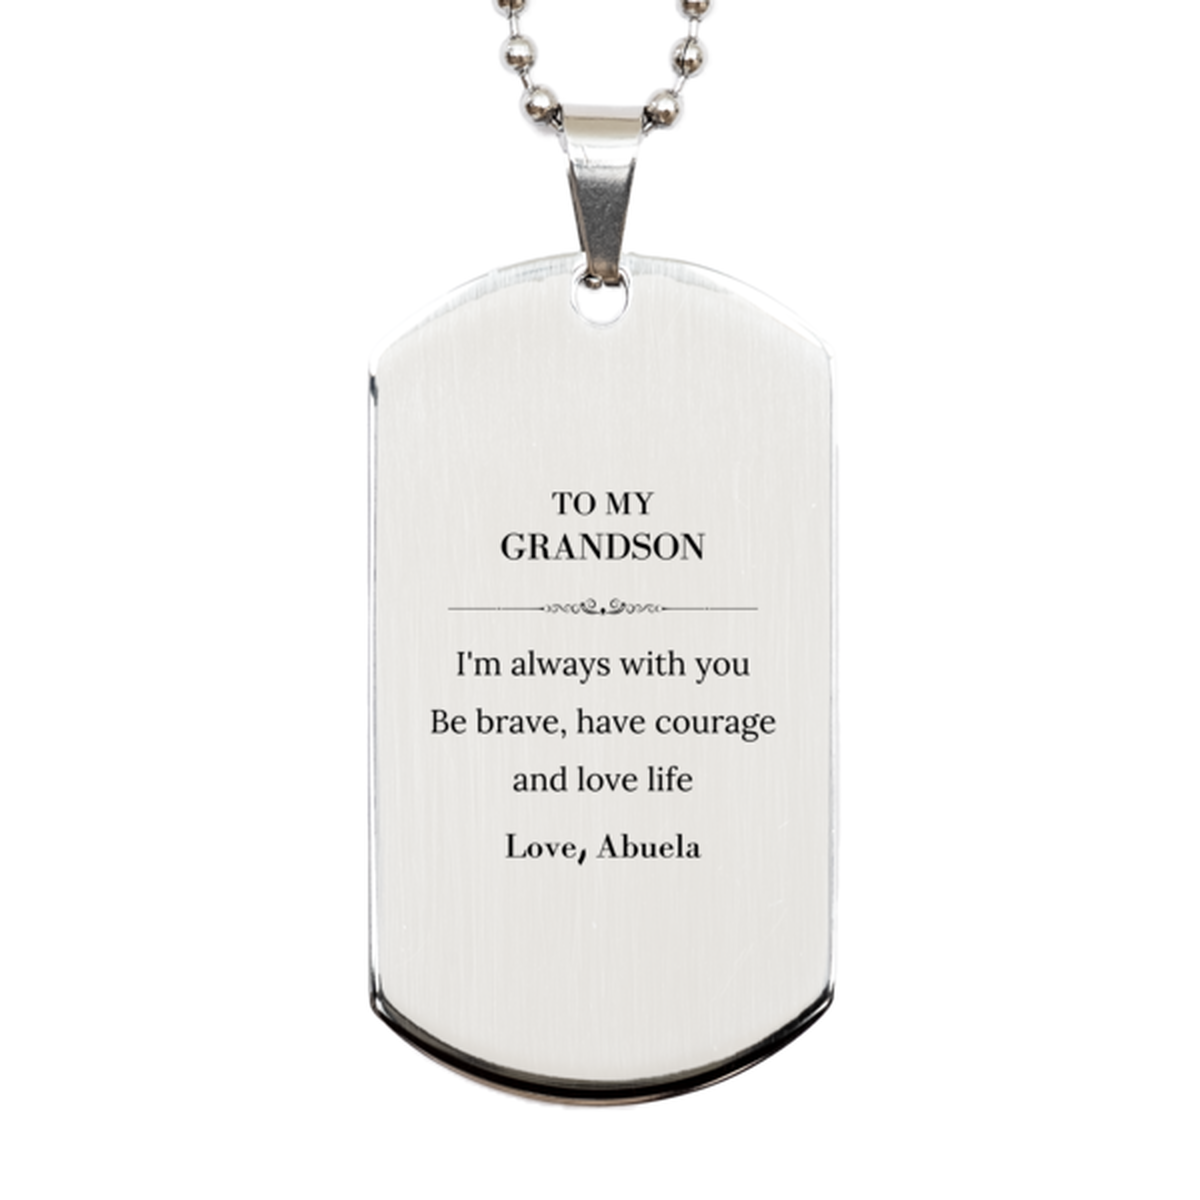 To My Grandson Gifts from Abuela, Unique Silver Dog Tag Inspirational Christmas Birthday Graduation Gifts for Grandson I'm always with you. Be brave, have courage and love life. Love, Abuela